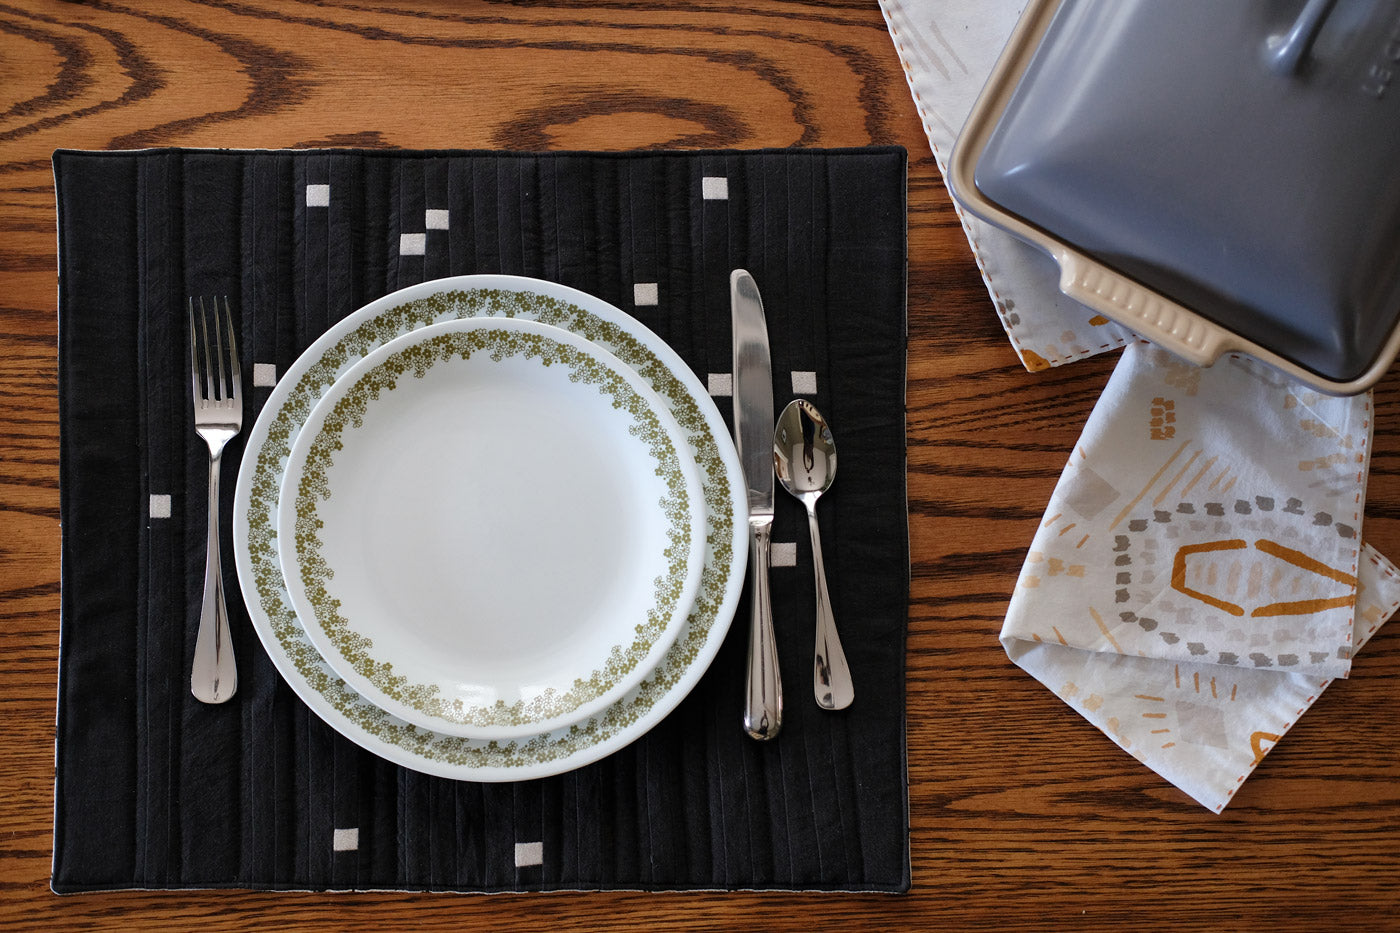 Sagittarius Placemat set with plates, silverware and napkins